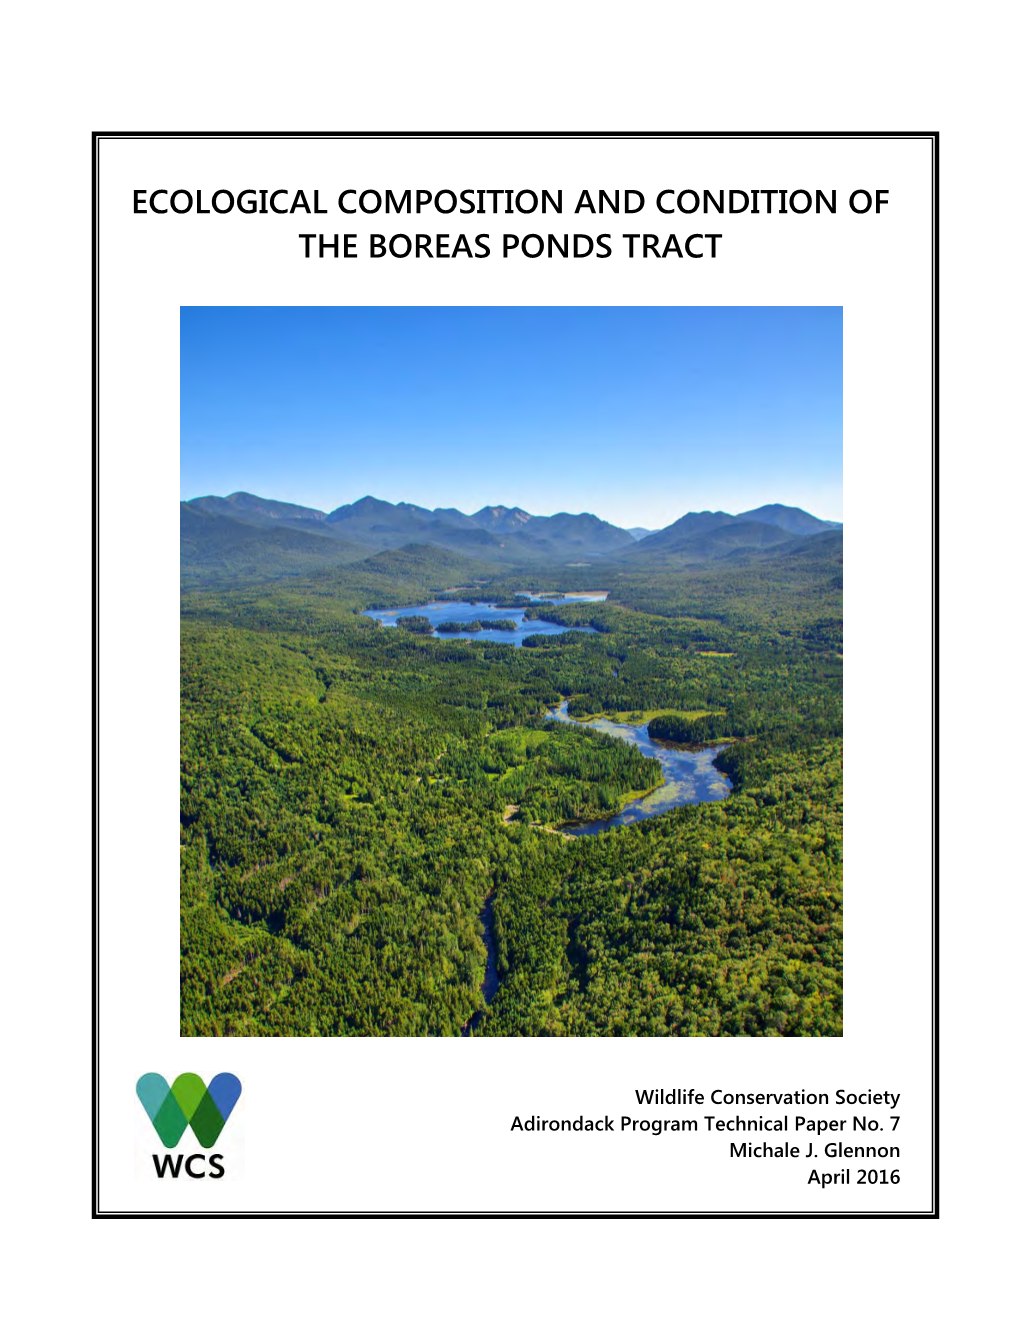 Ecological Composition and Condition of the Boreas Tract